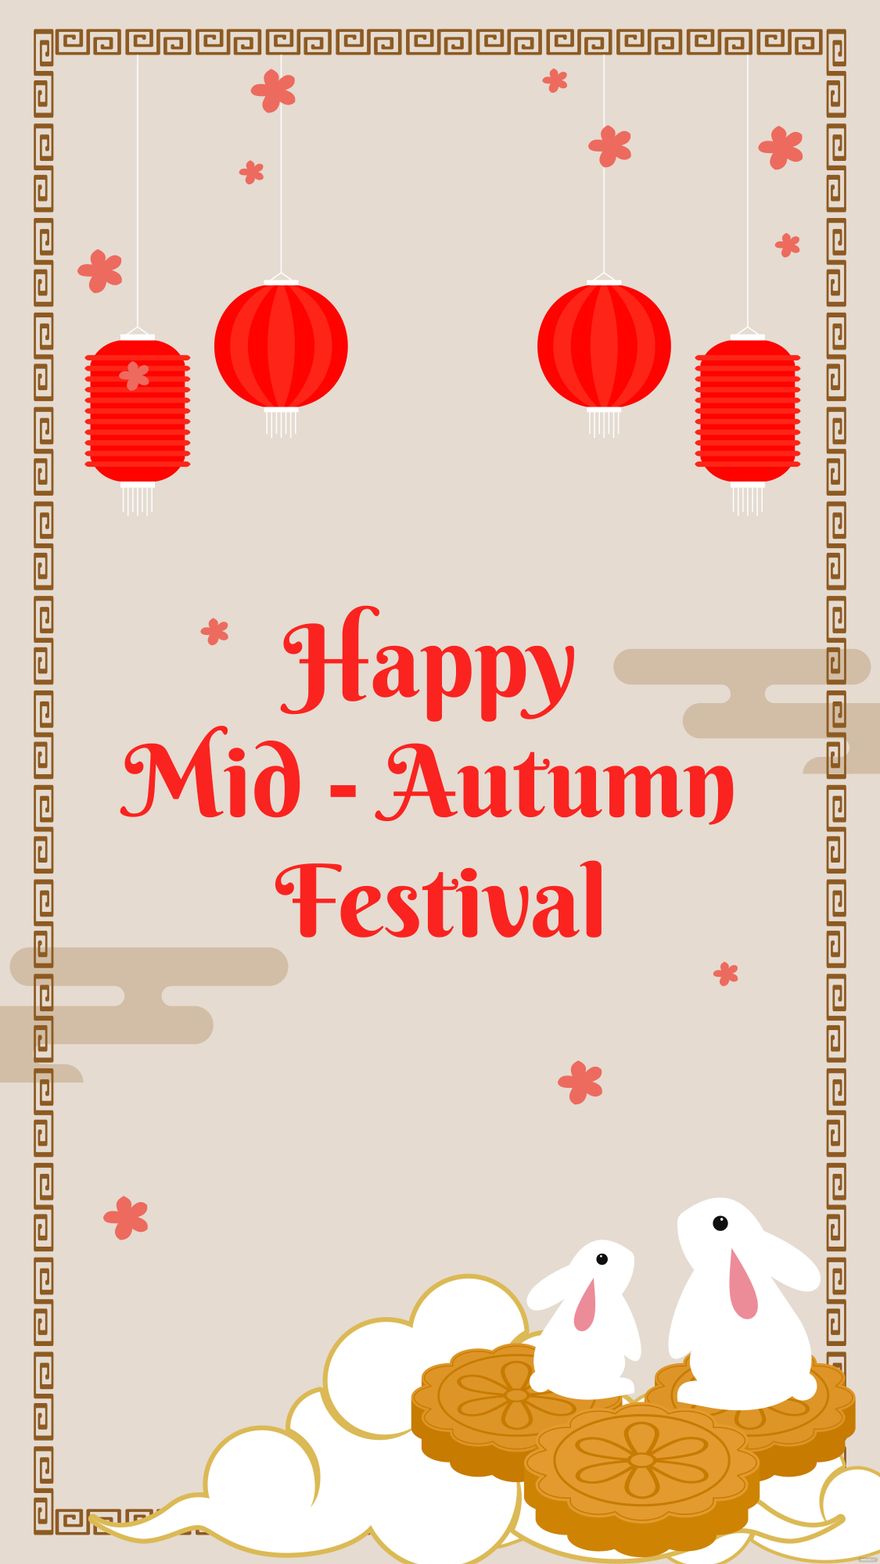 Free Mid-Autumn Festival iPhone background in PDF, Illustrator, PSD, EPS, SVG, JPG, PNG